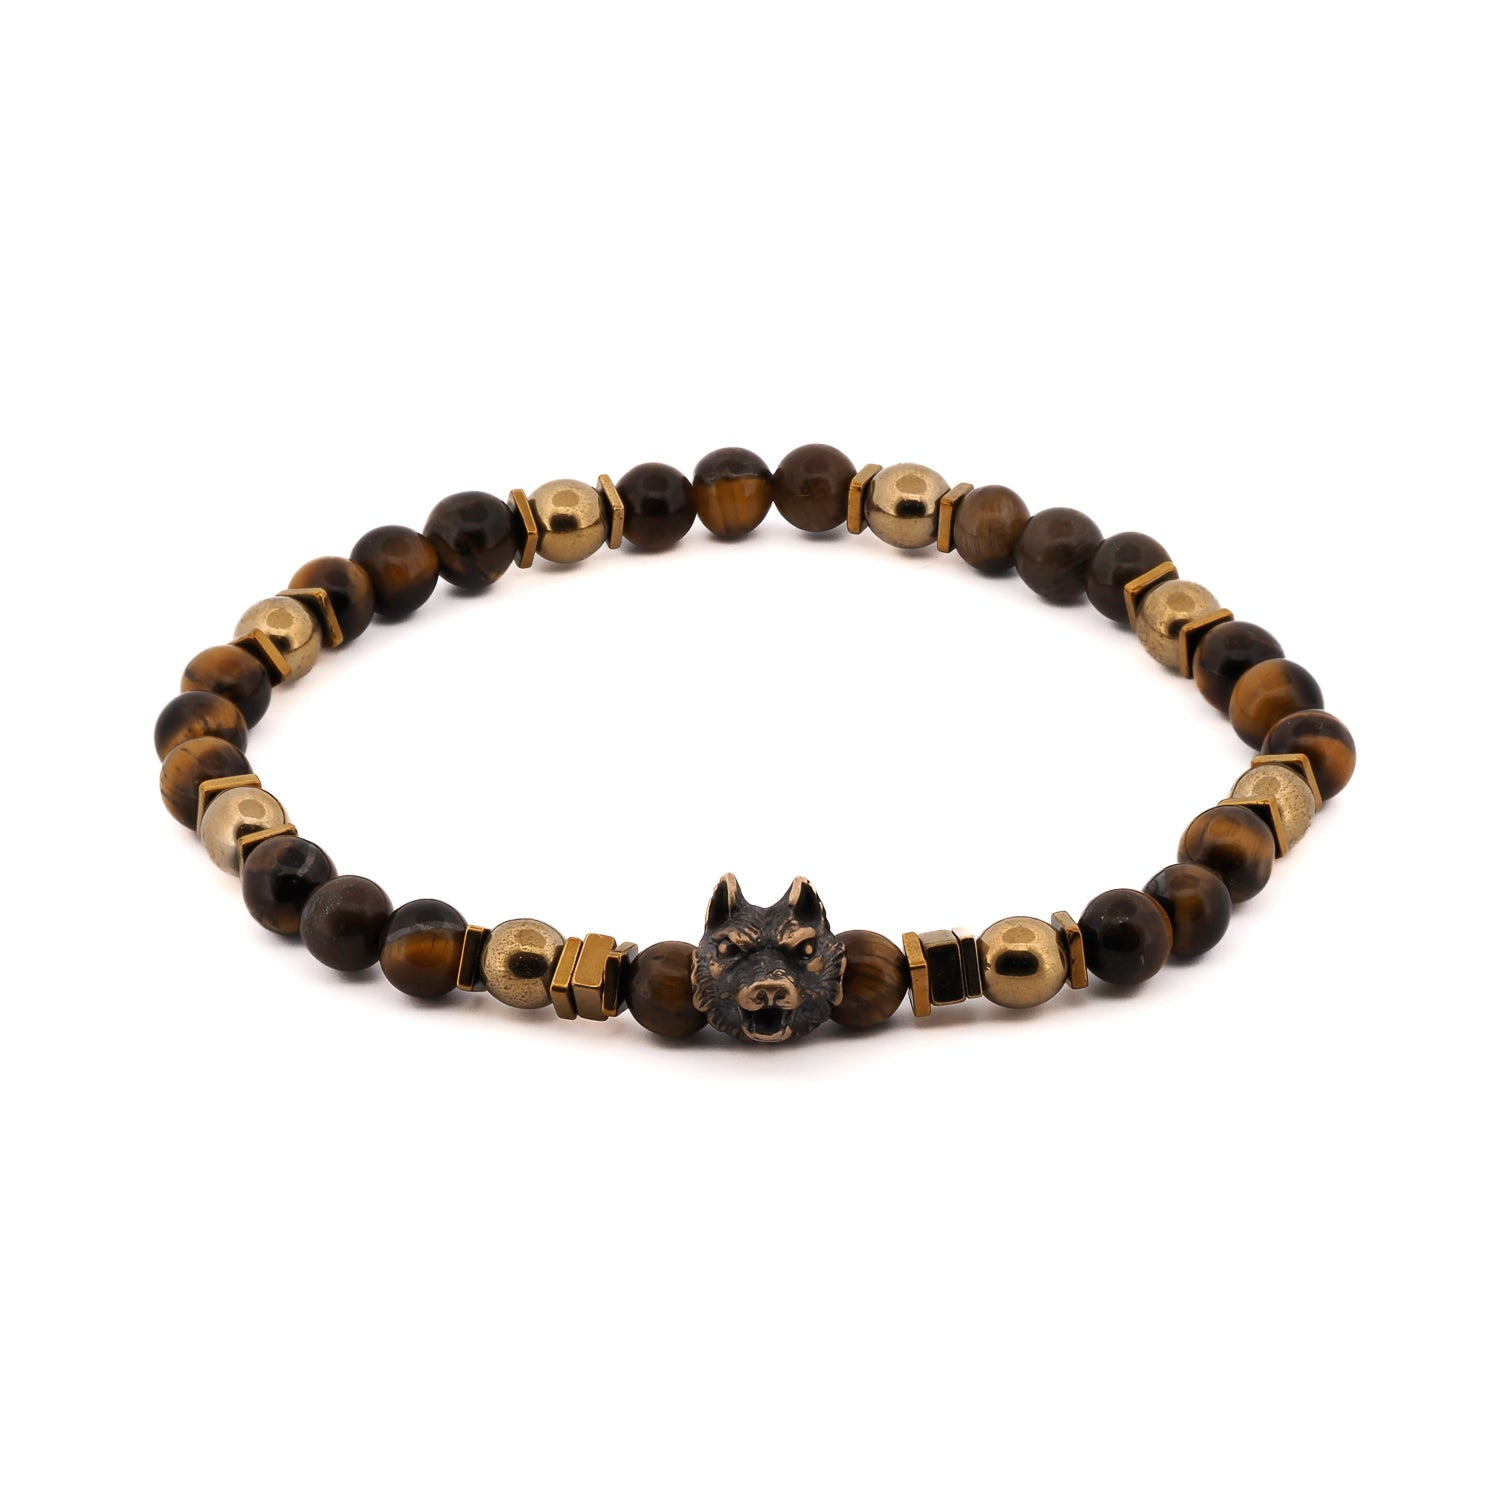 Freedom Wolf Tiger's Eye Stone Men's Bracelet featuring 6mm brown tiger's eye stone beads and a bronze wolf charm